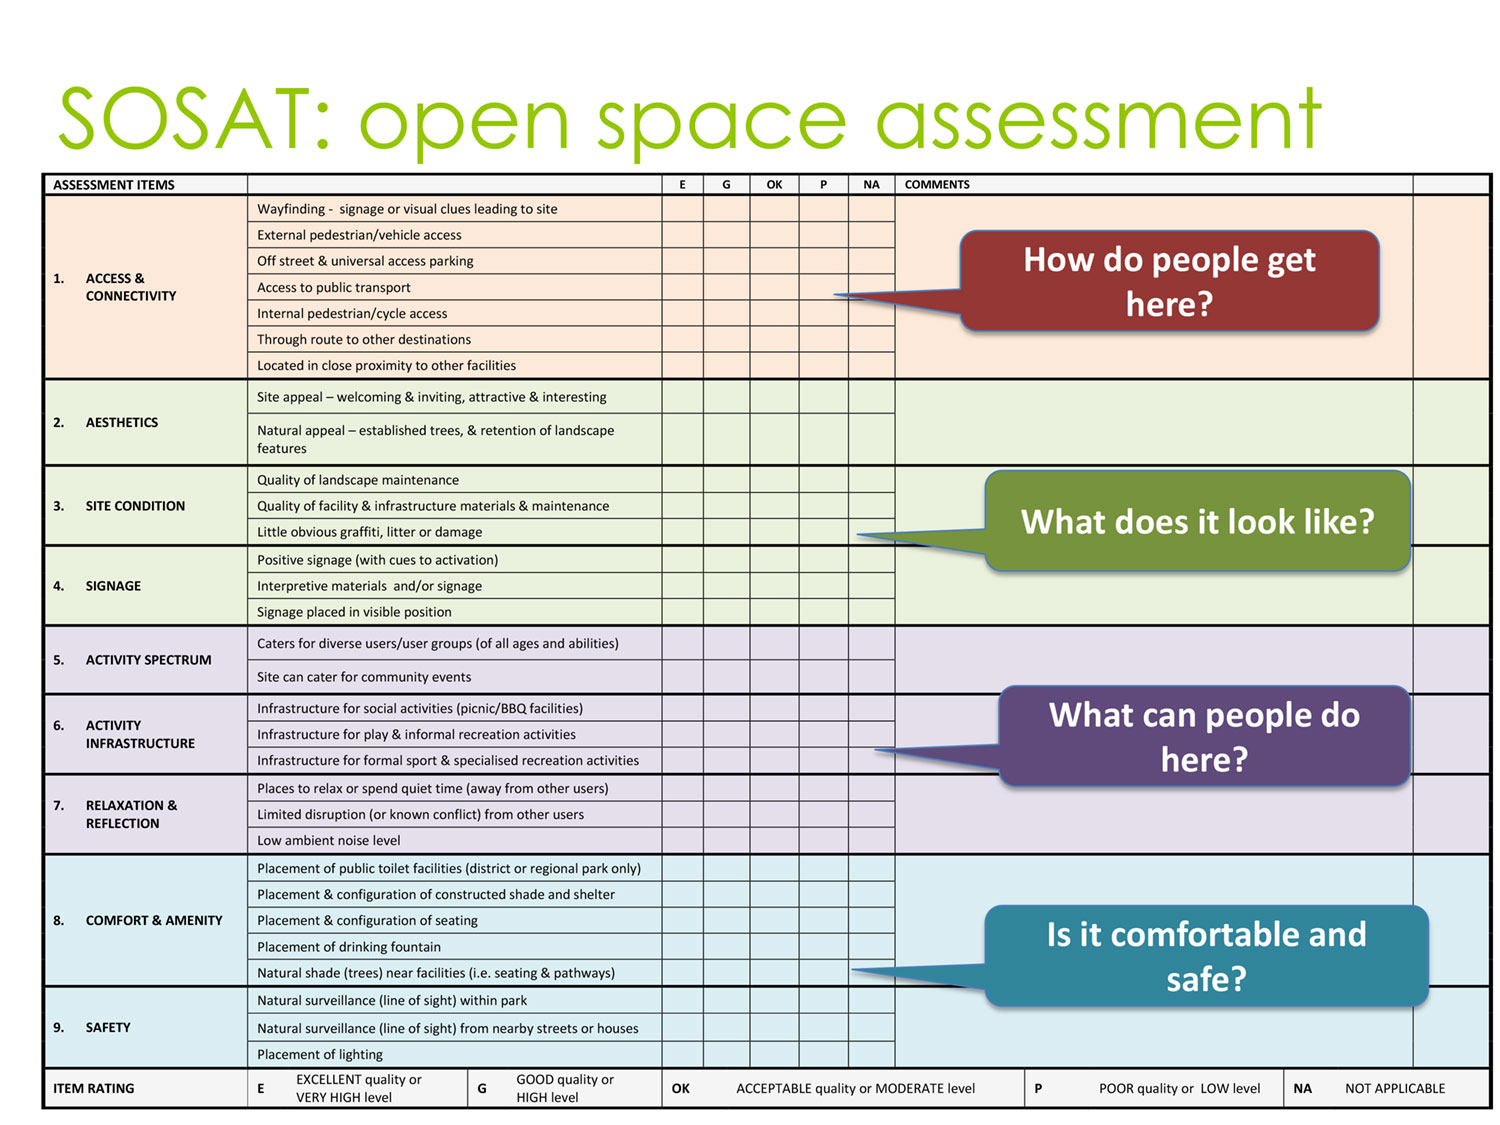 Subiaco Open Space Assessment Tool visual example